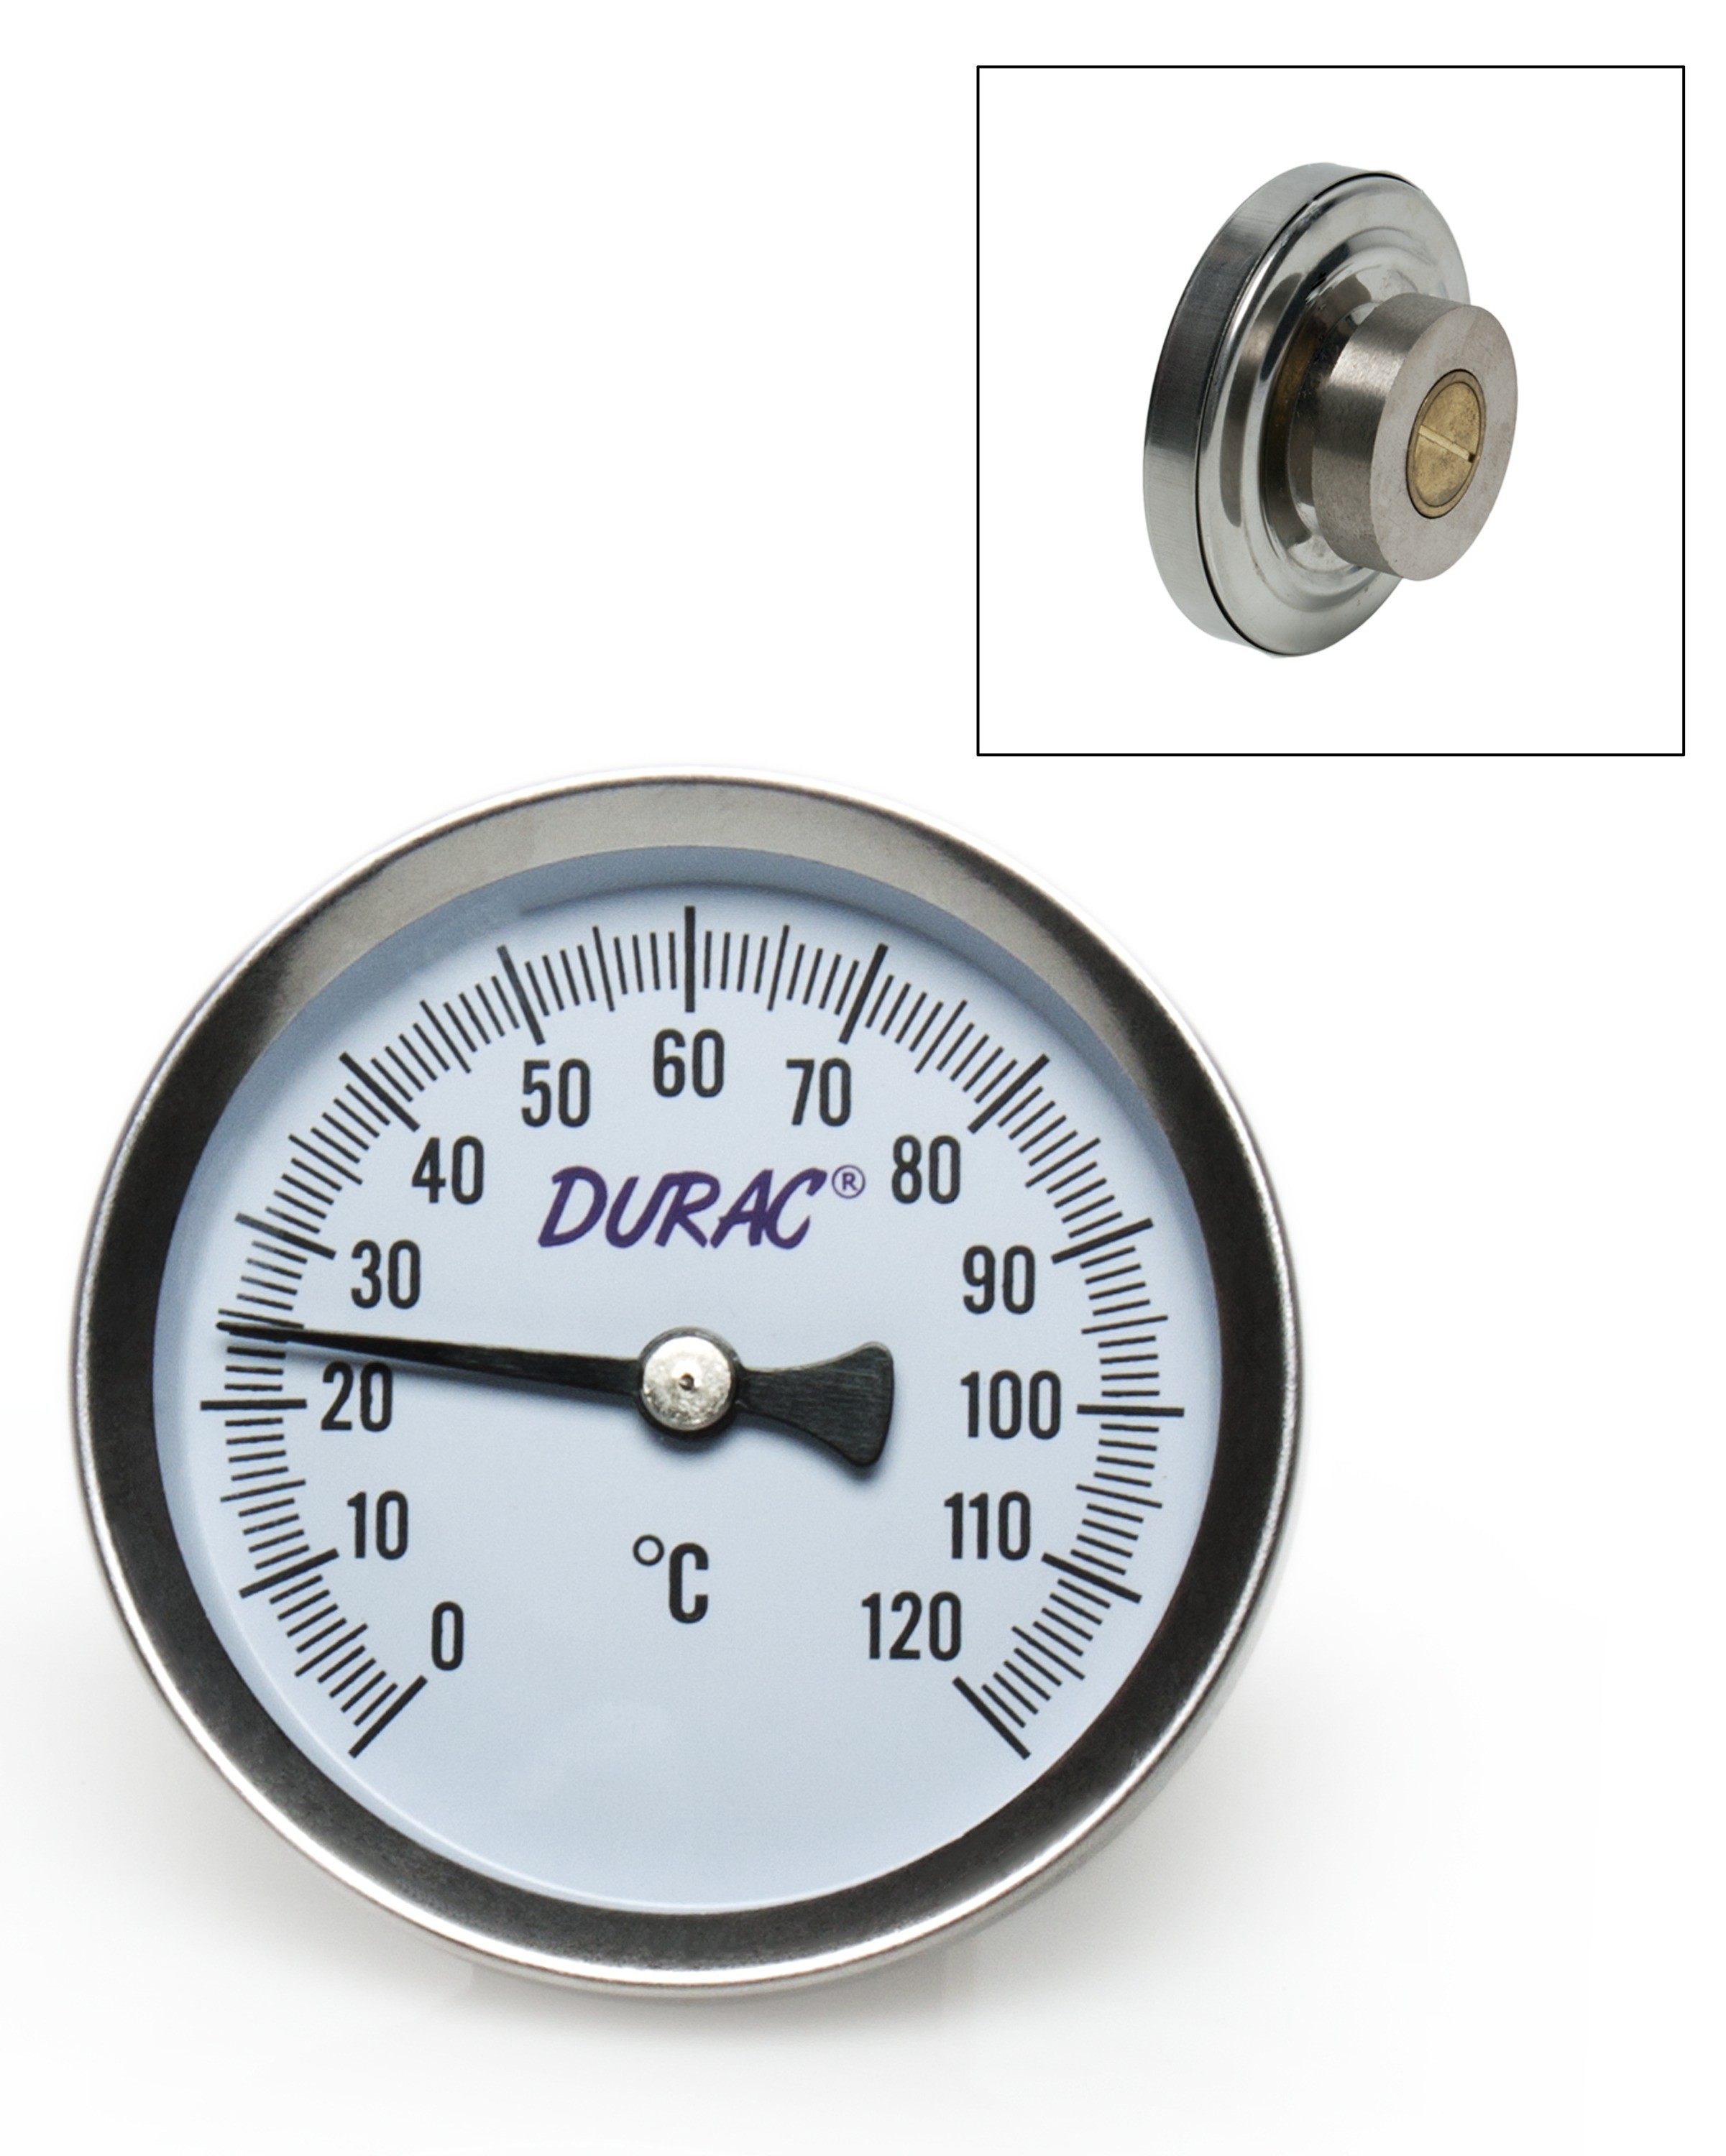 industrial bimetal hot water heater thermometer